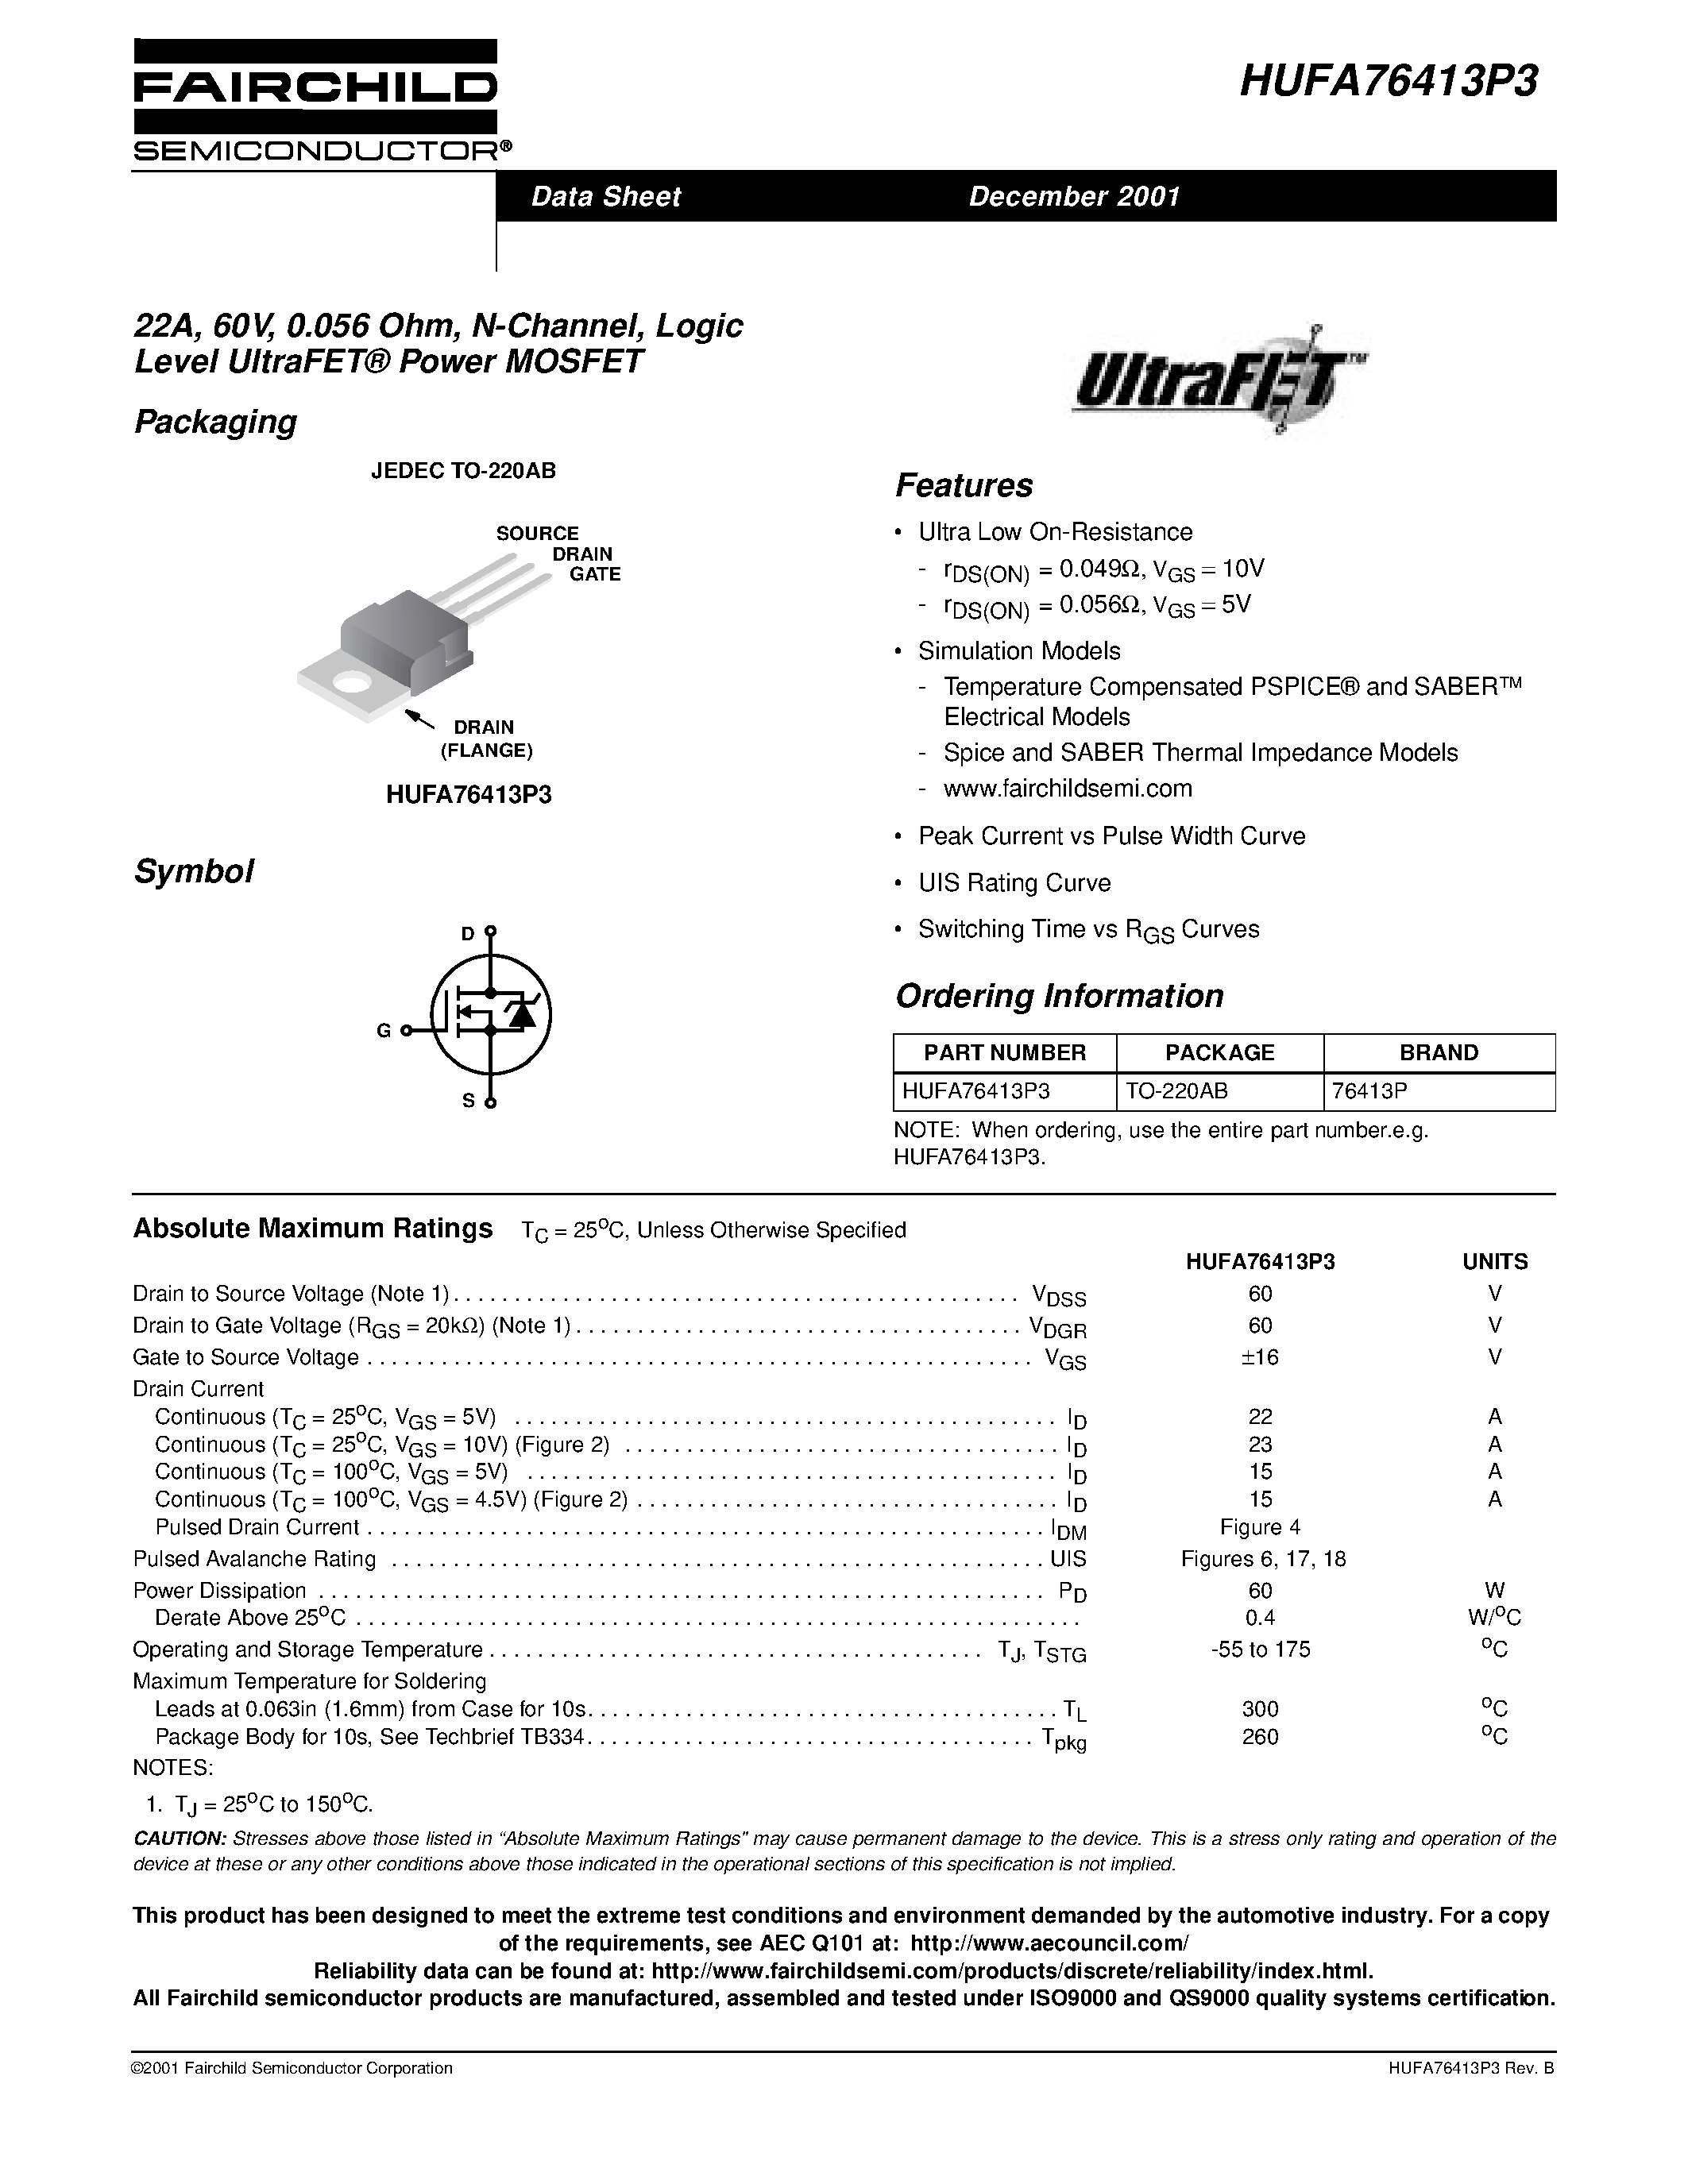 Datasheet HUFA76413P3 - 22A/ 60V/ 0.056 Ohm/ N-Channel/ Logic Level UltraFET Power MOSFET page 1